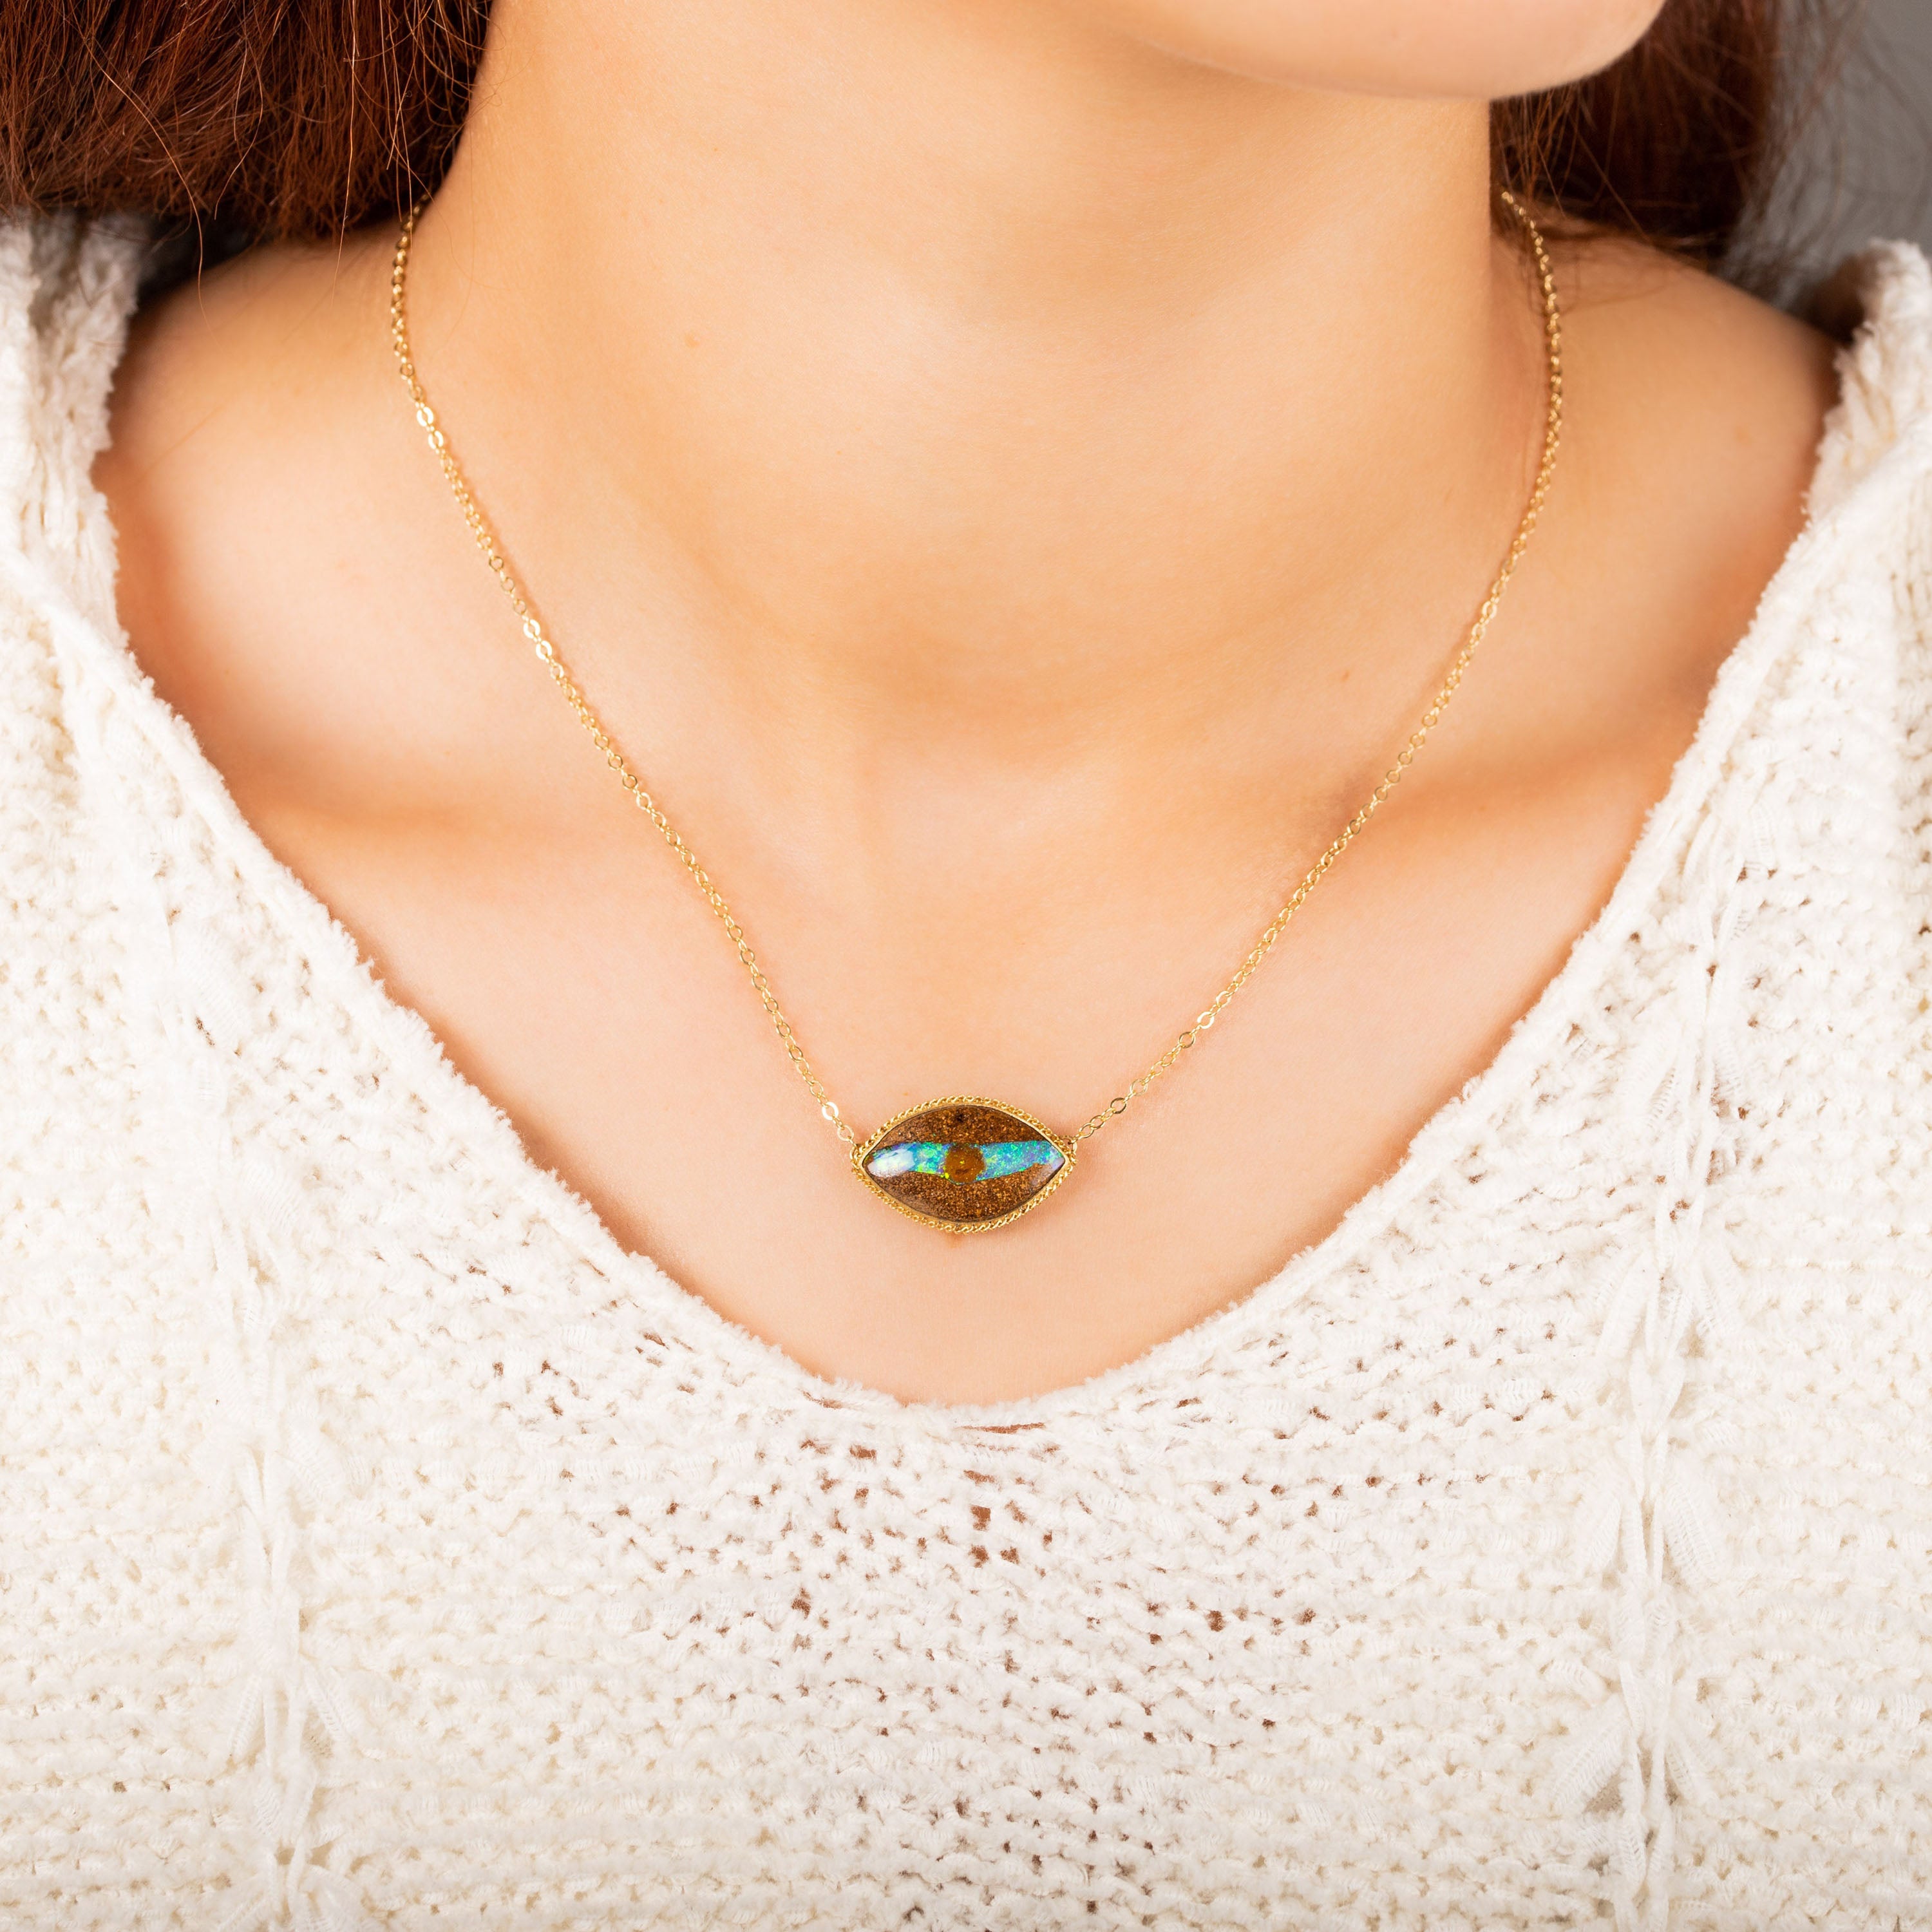 Medium Opalized Wood 18k One of a Kind Necklace